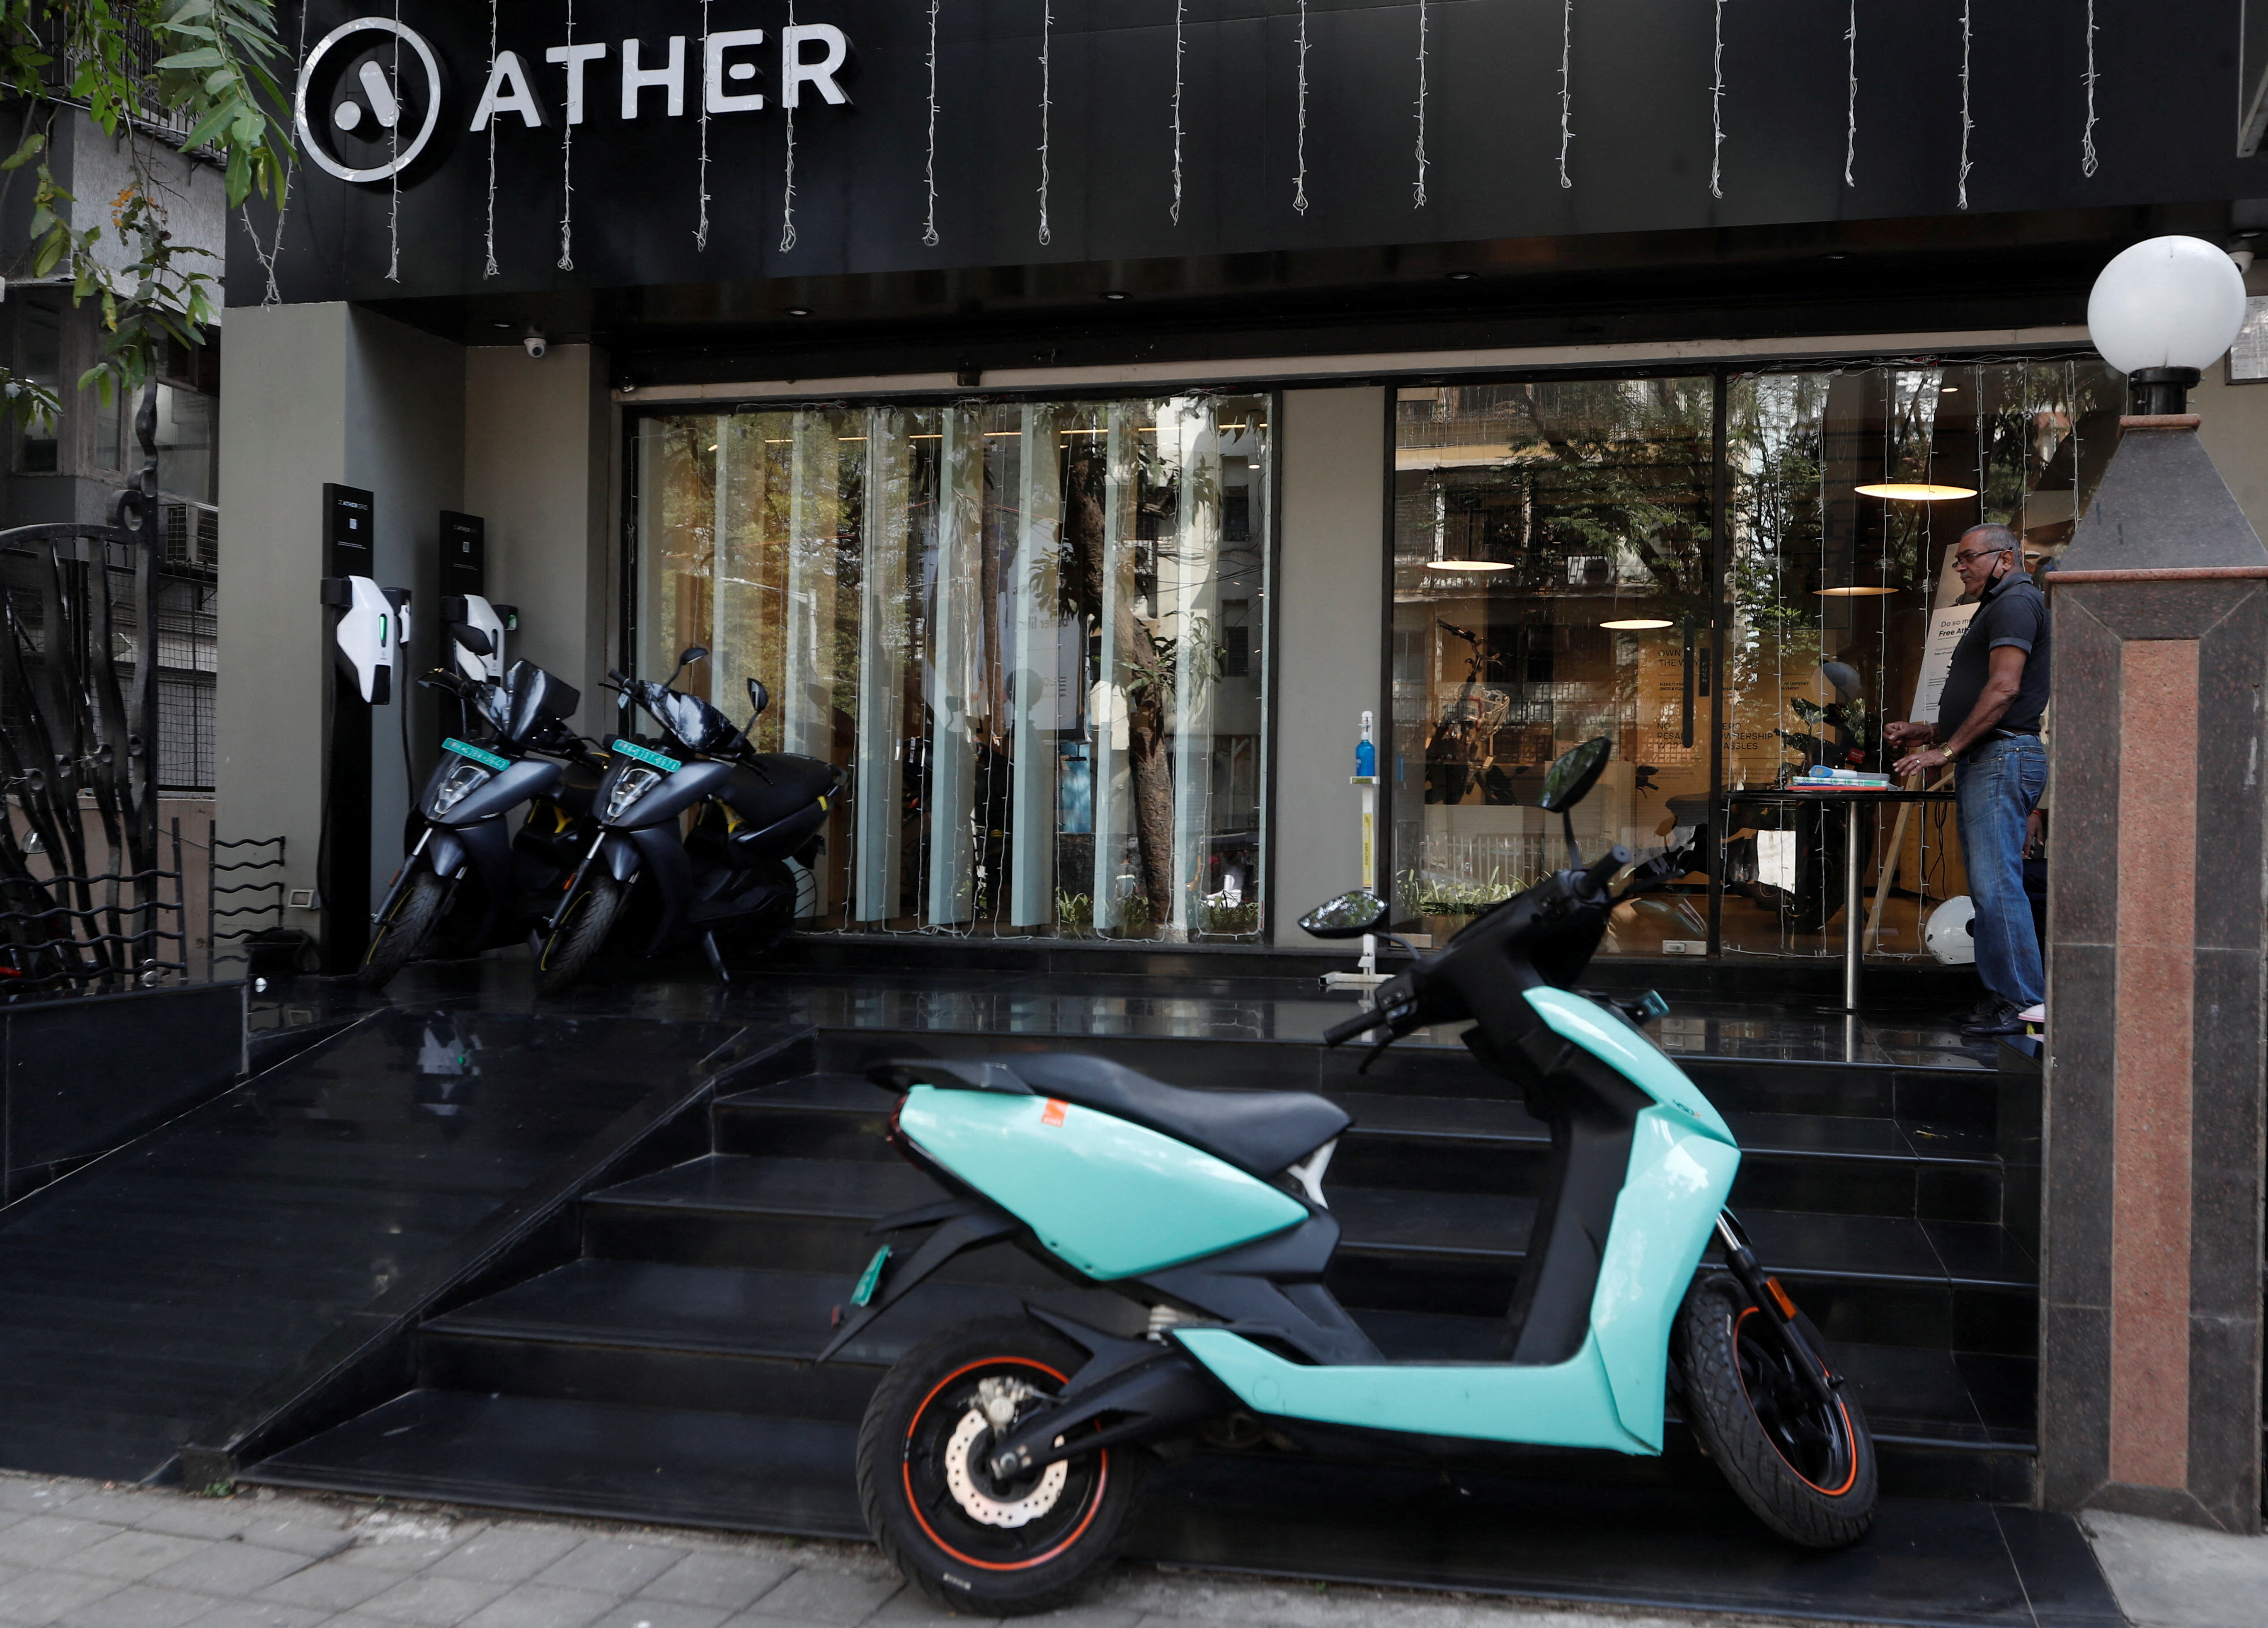 Ather electric scooters are seen outside the showroom in Mumbai